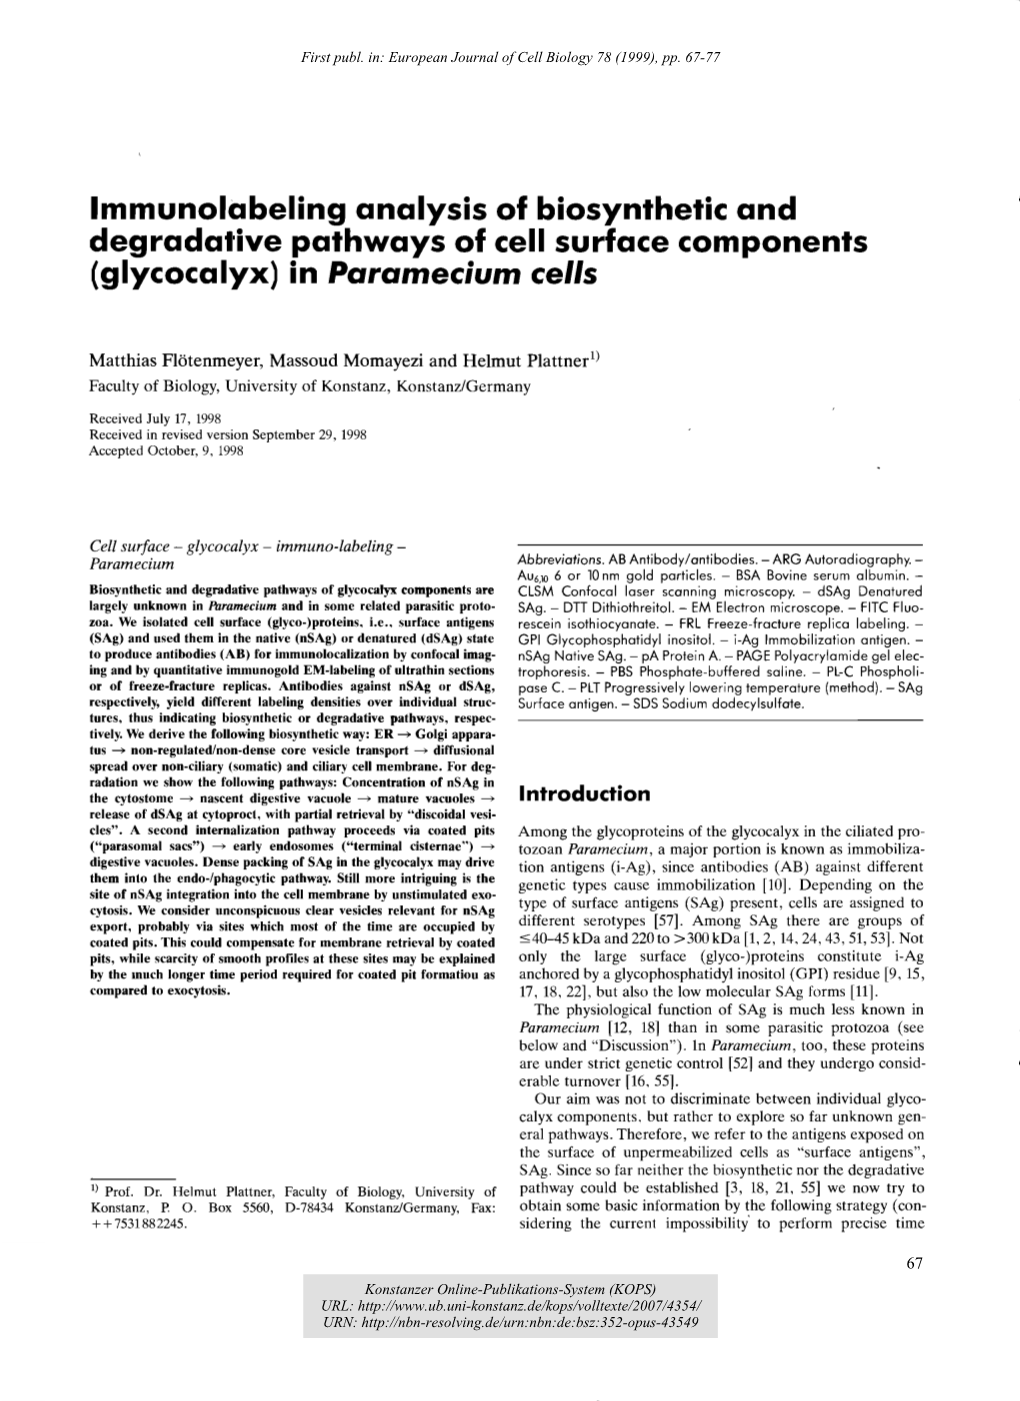 Immunolabeling Analysis of Biosynthetic and Degradative Pathways of Cell Surface Components (Glycocalyx) in Paramecium Cells